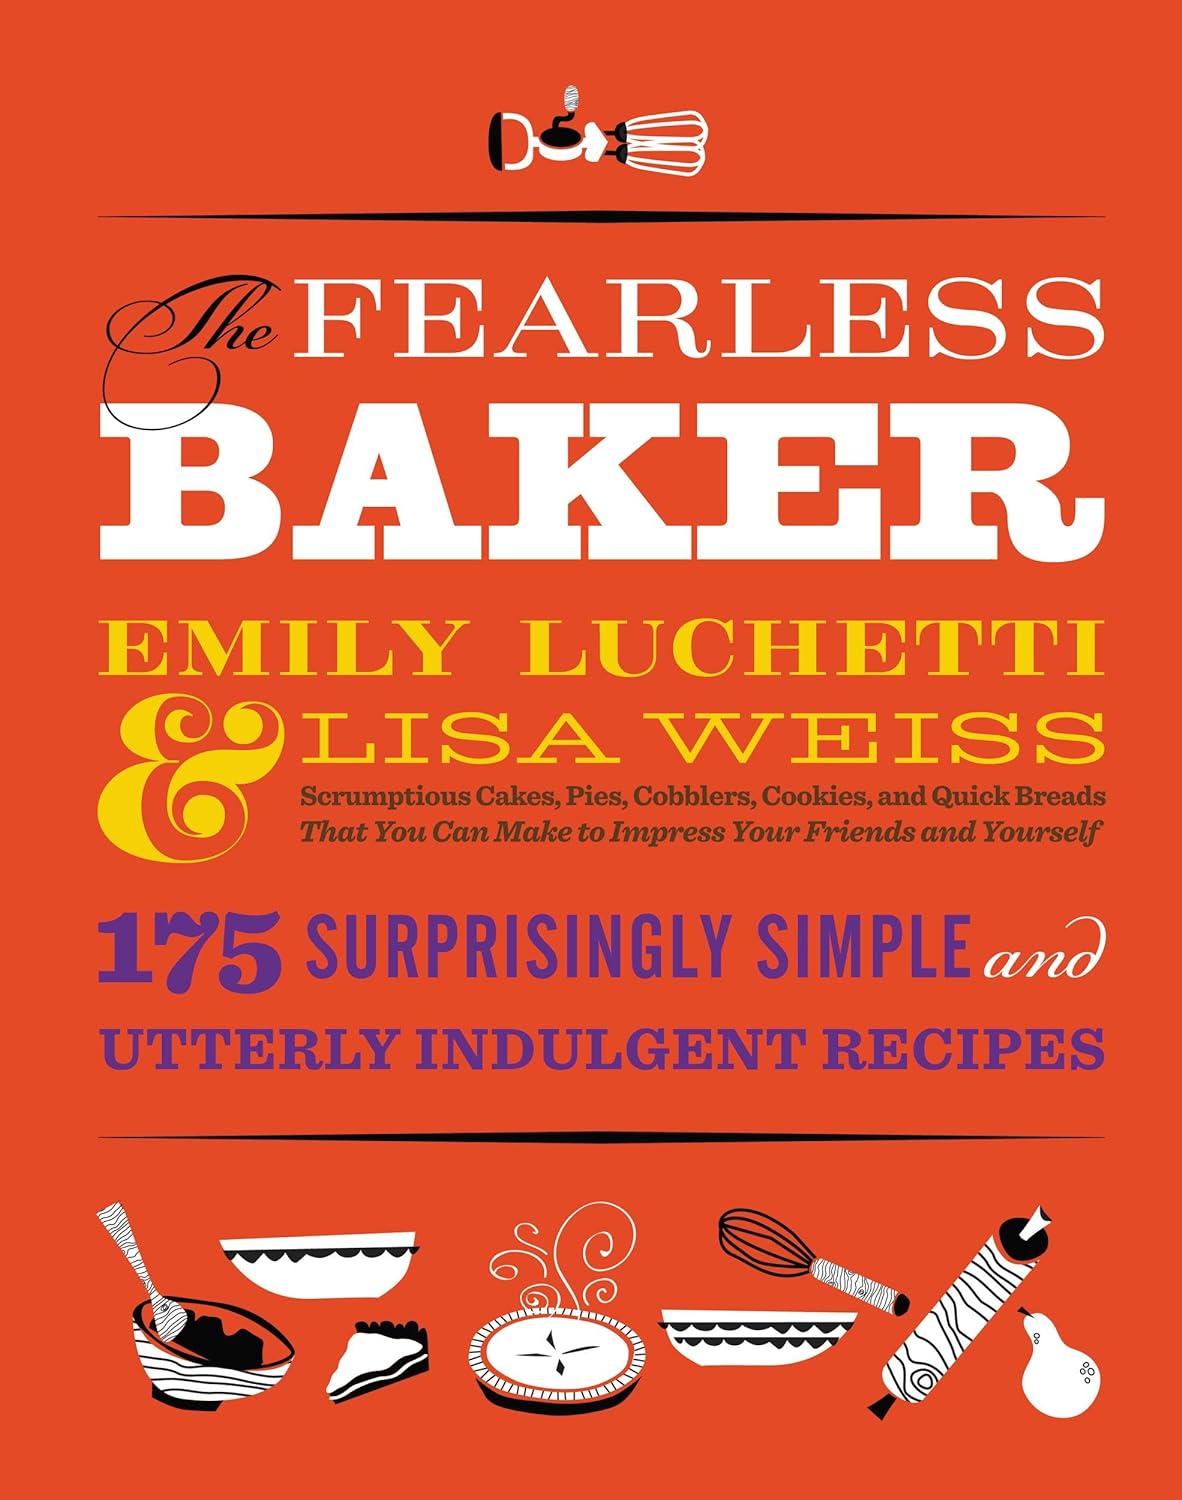 The Fearless Baker: Scrumptious Cakes, Pies, Cobblers, Cookies, and Quick Breads that You Can Make to Impress Your Friends and Yourself (Lisa Weiss and Emily Luchetti)